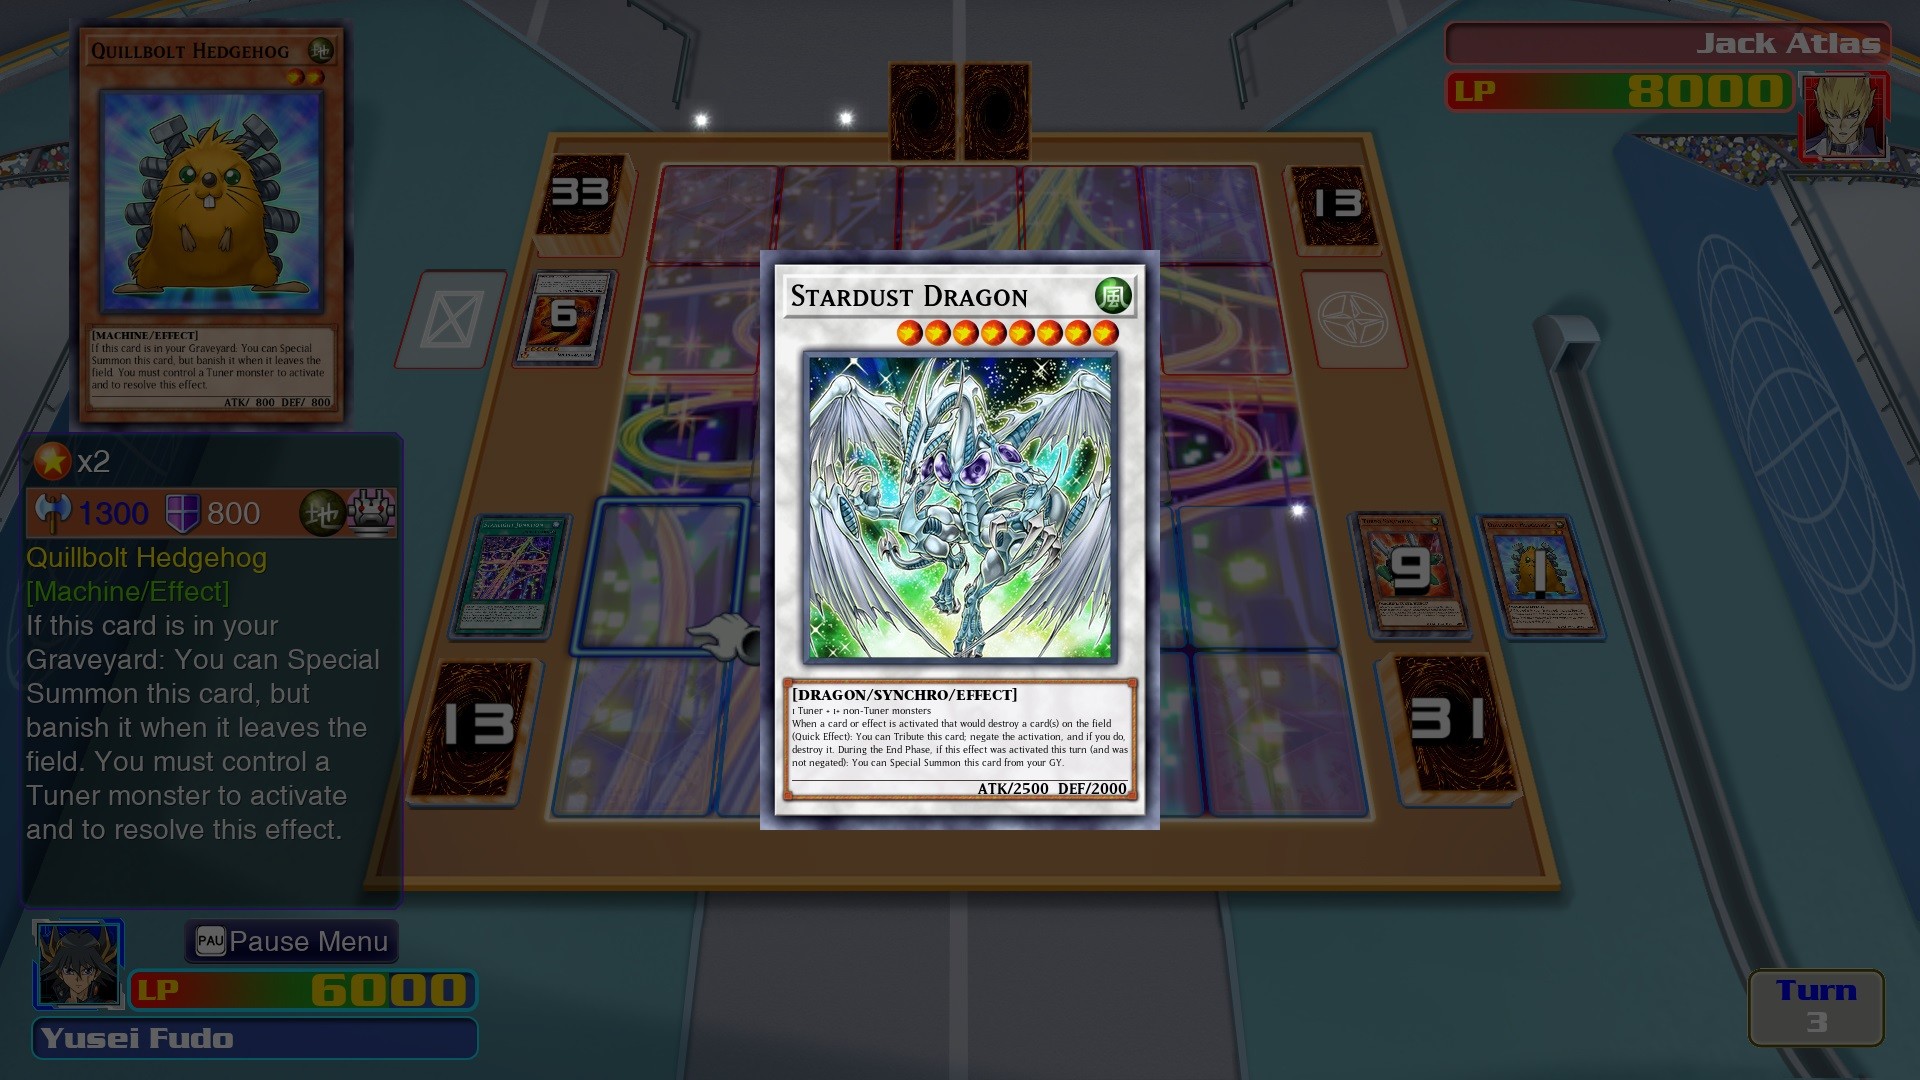 yugioh legacy of the duelist all cards mod